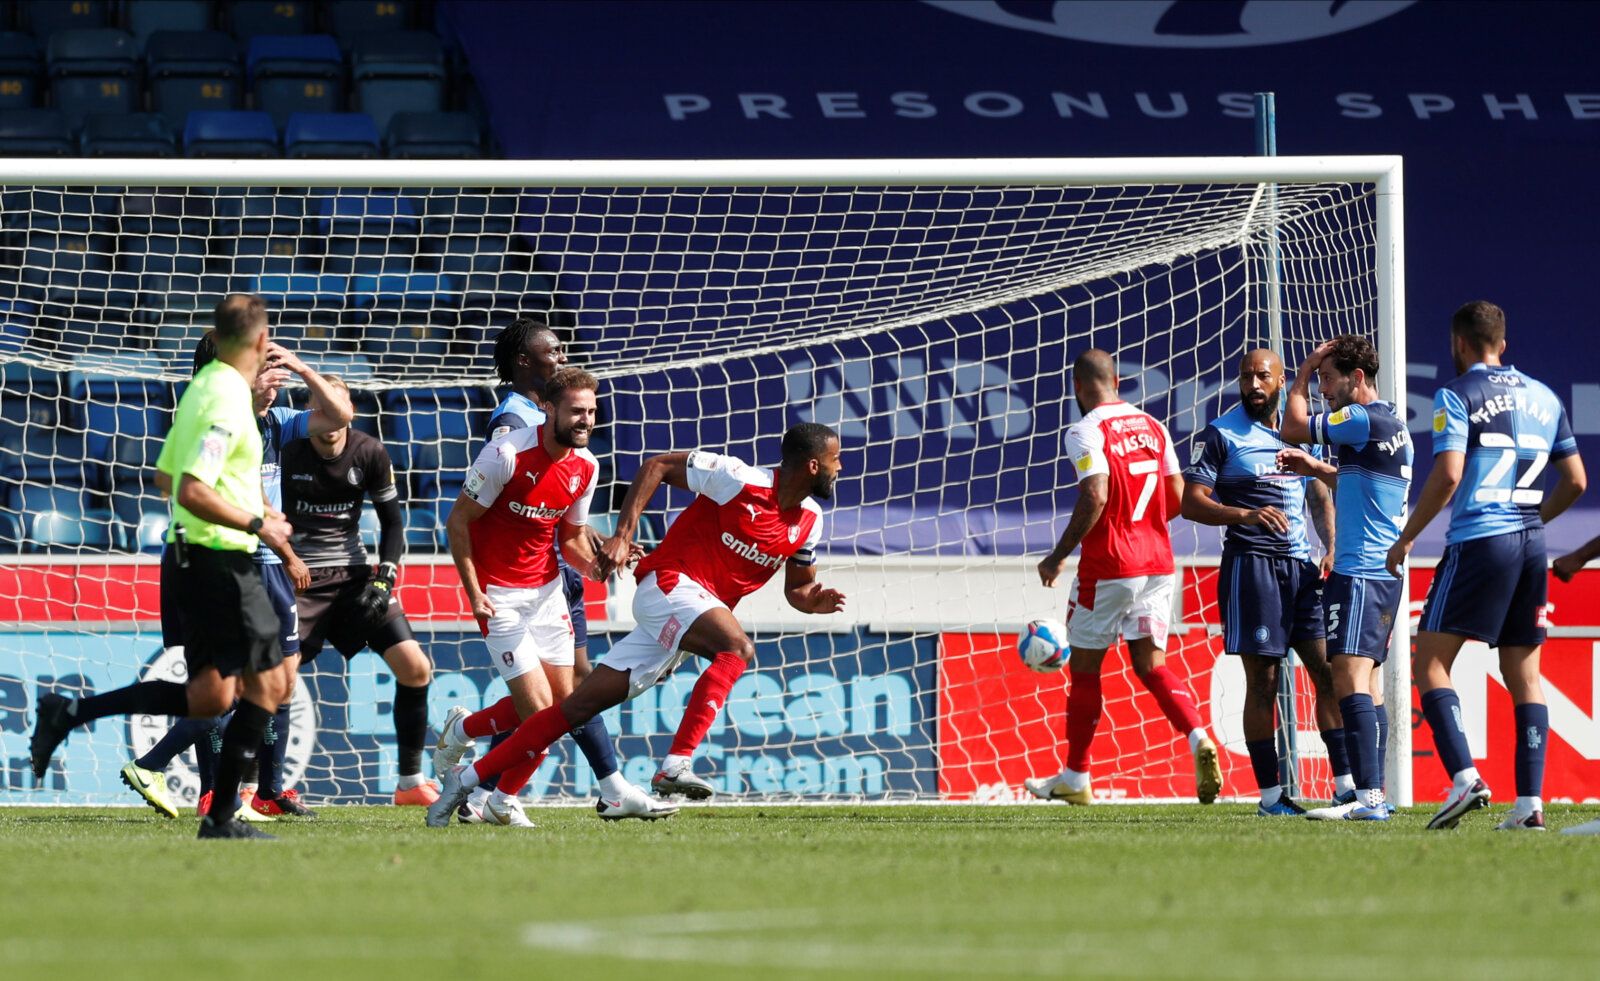 Soccer Football - Championship - Wycombe Wanderers v Rotherham United - Adams Park, High Wycombe, Britain - September 12, 2020   Rotherham United’s Michael Ihiekwe celebrates scoring their first goal   Action Images/Matthew Childs    EDITORIAL USE ONLY. No use with unauthorized audio, video, data, fixture lists, club/league logos or 